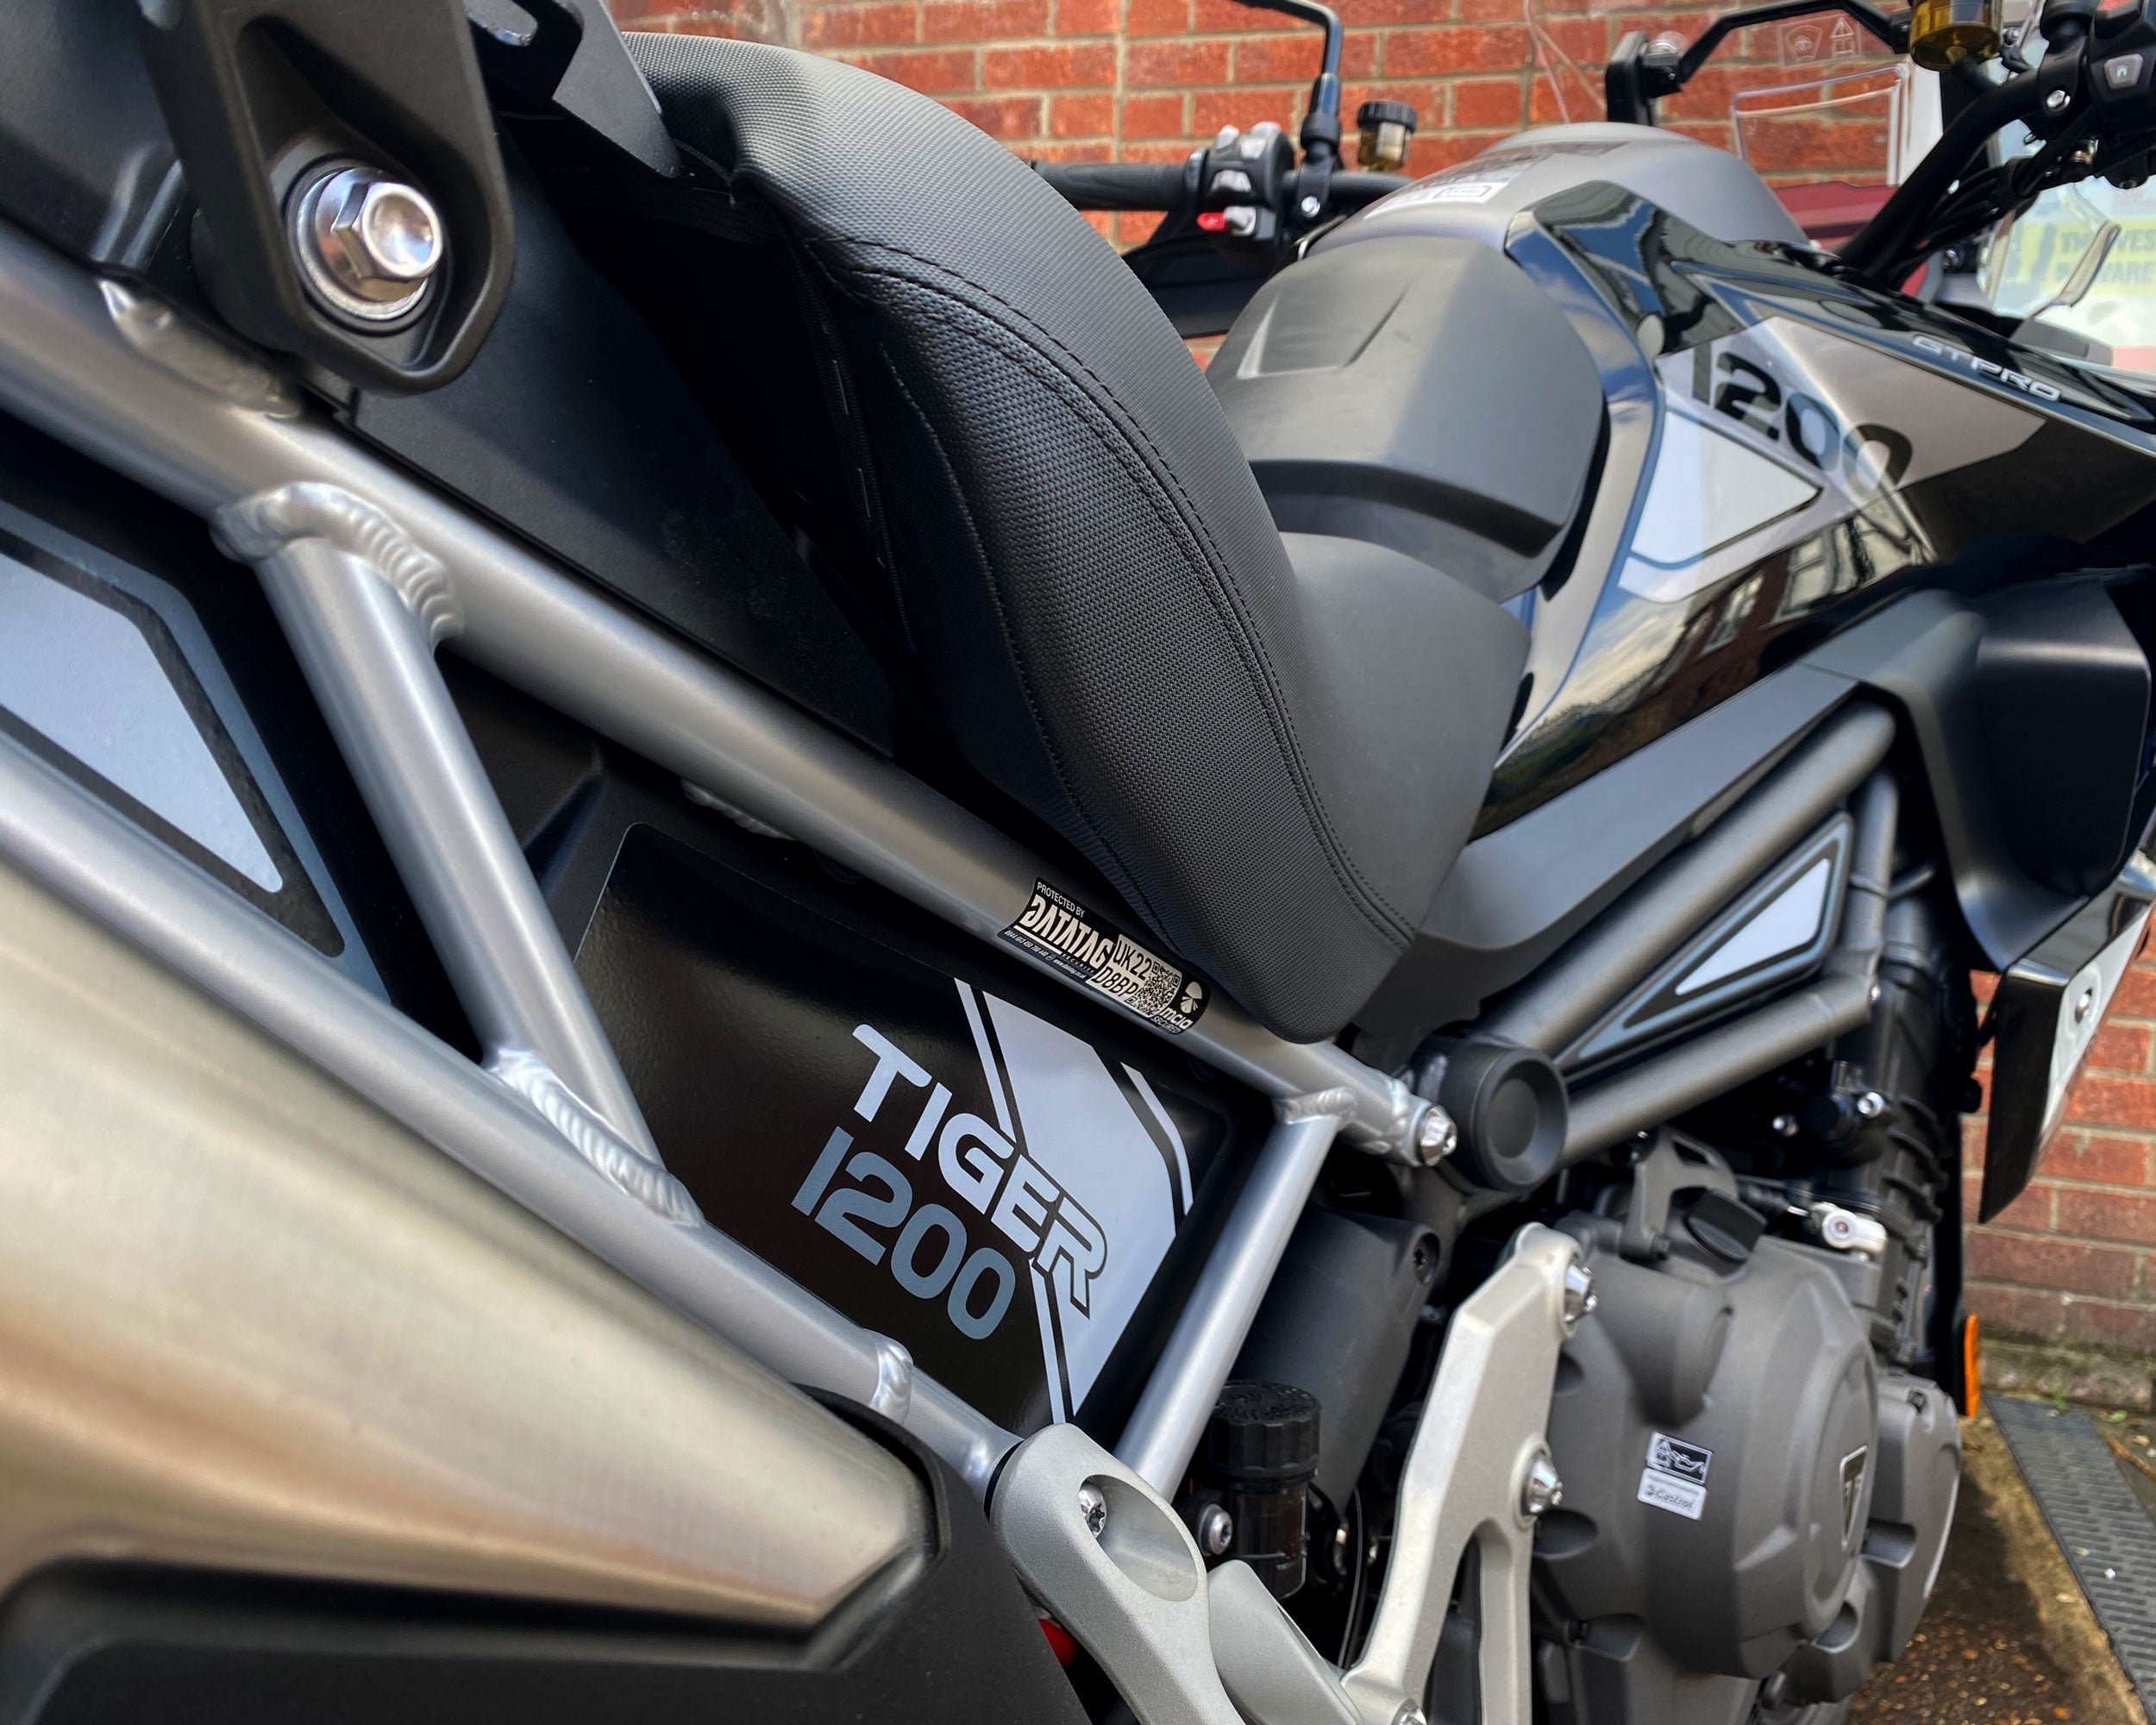 Pyramid Decals (Set of 6) | Black & Grey | Triumph Tiger 1200 Rally Pro 2022>Current-BRA08695B-Decals-Pyramid Motorcycle Accessories